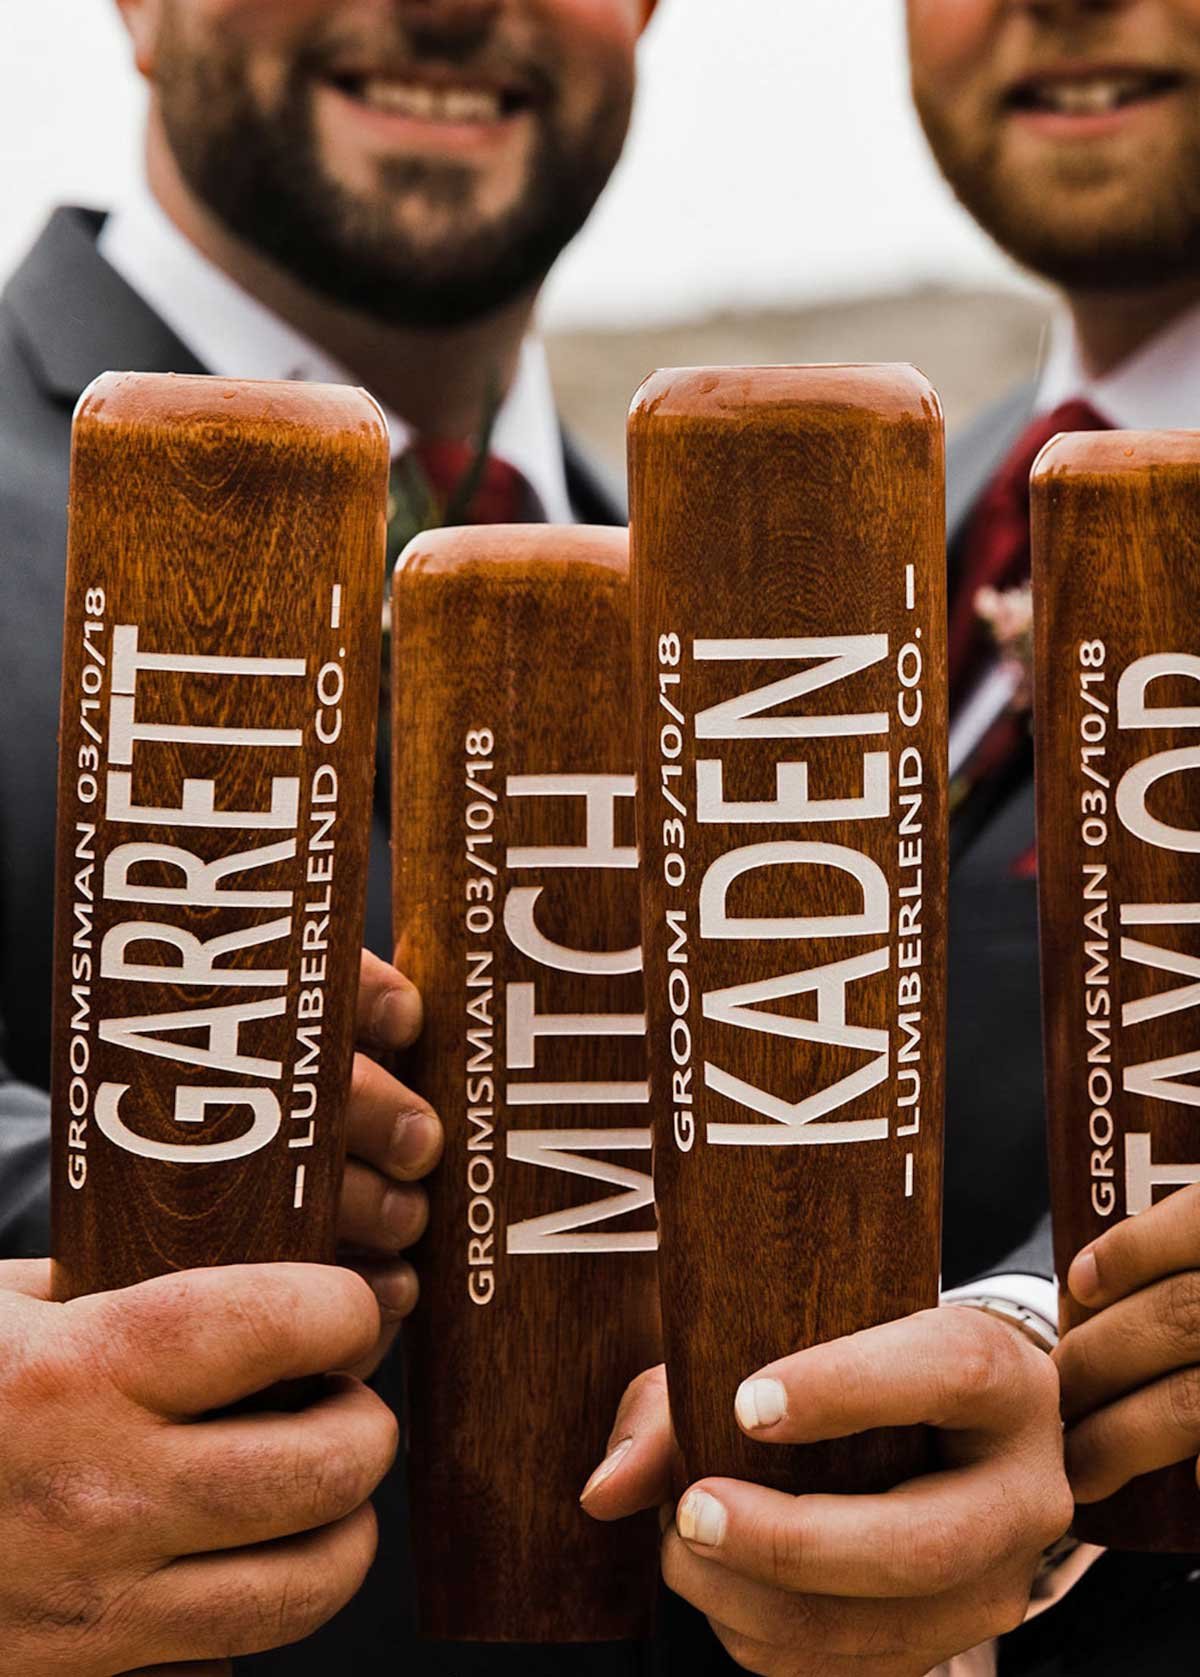 Groomsmen Can Cooler and Bottle Opener, Personalized Groomsmen Gifts,  Groomsman Gift, Bachelor Party Favors, Beer Can Holder 